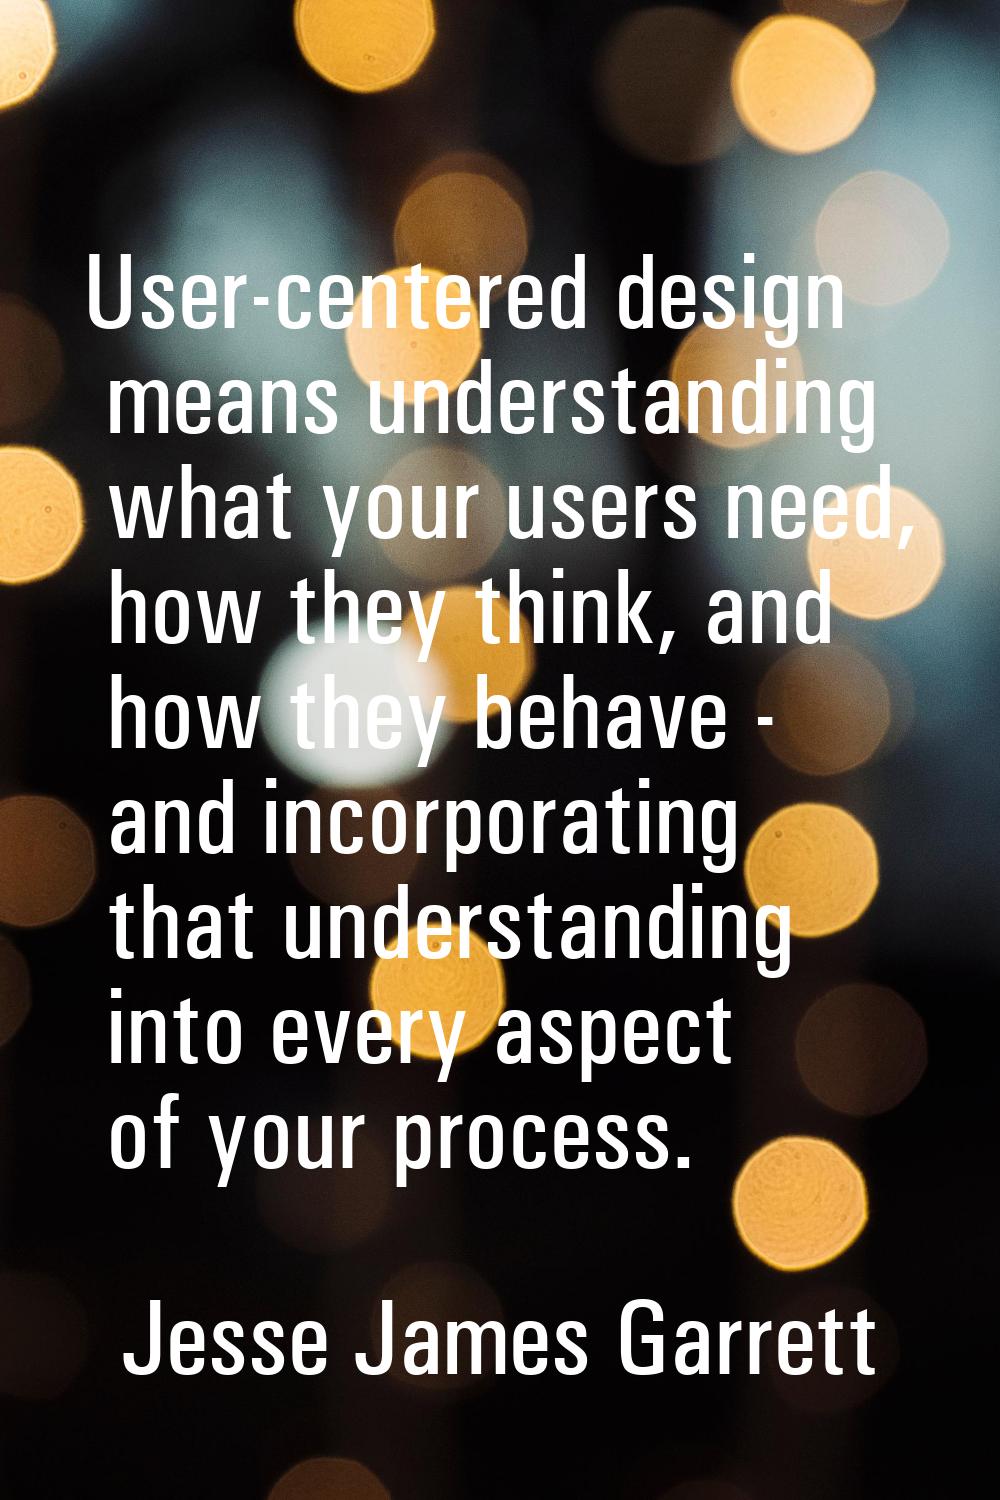 User-centered design means understanding what your users need, how they think, and how they behave 